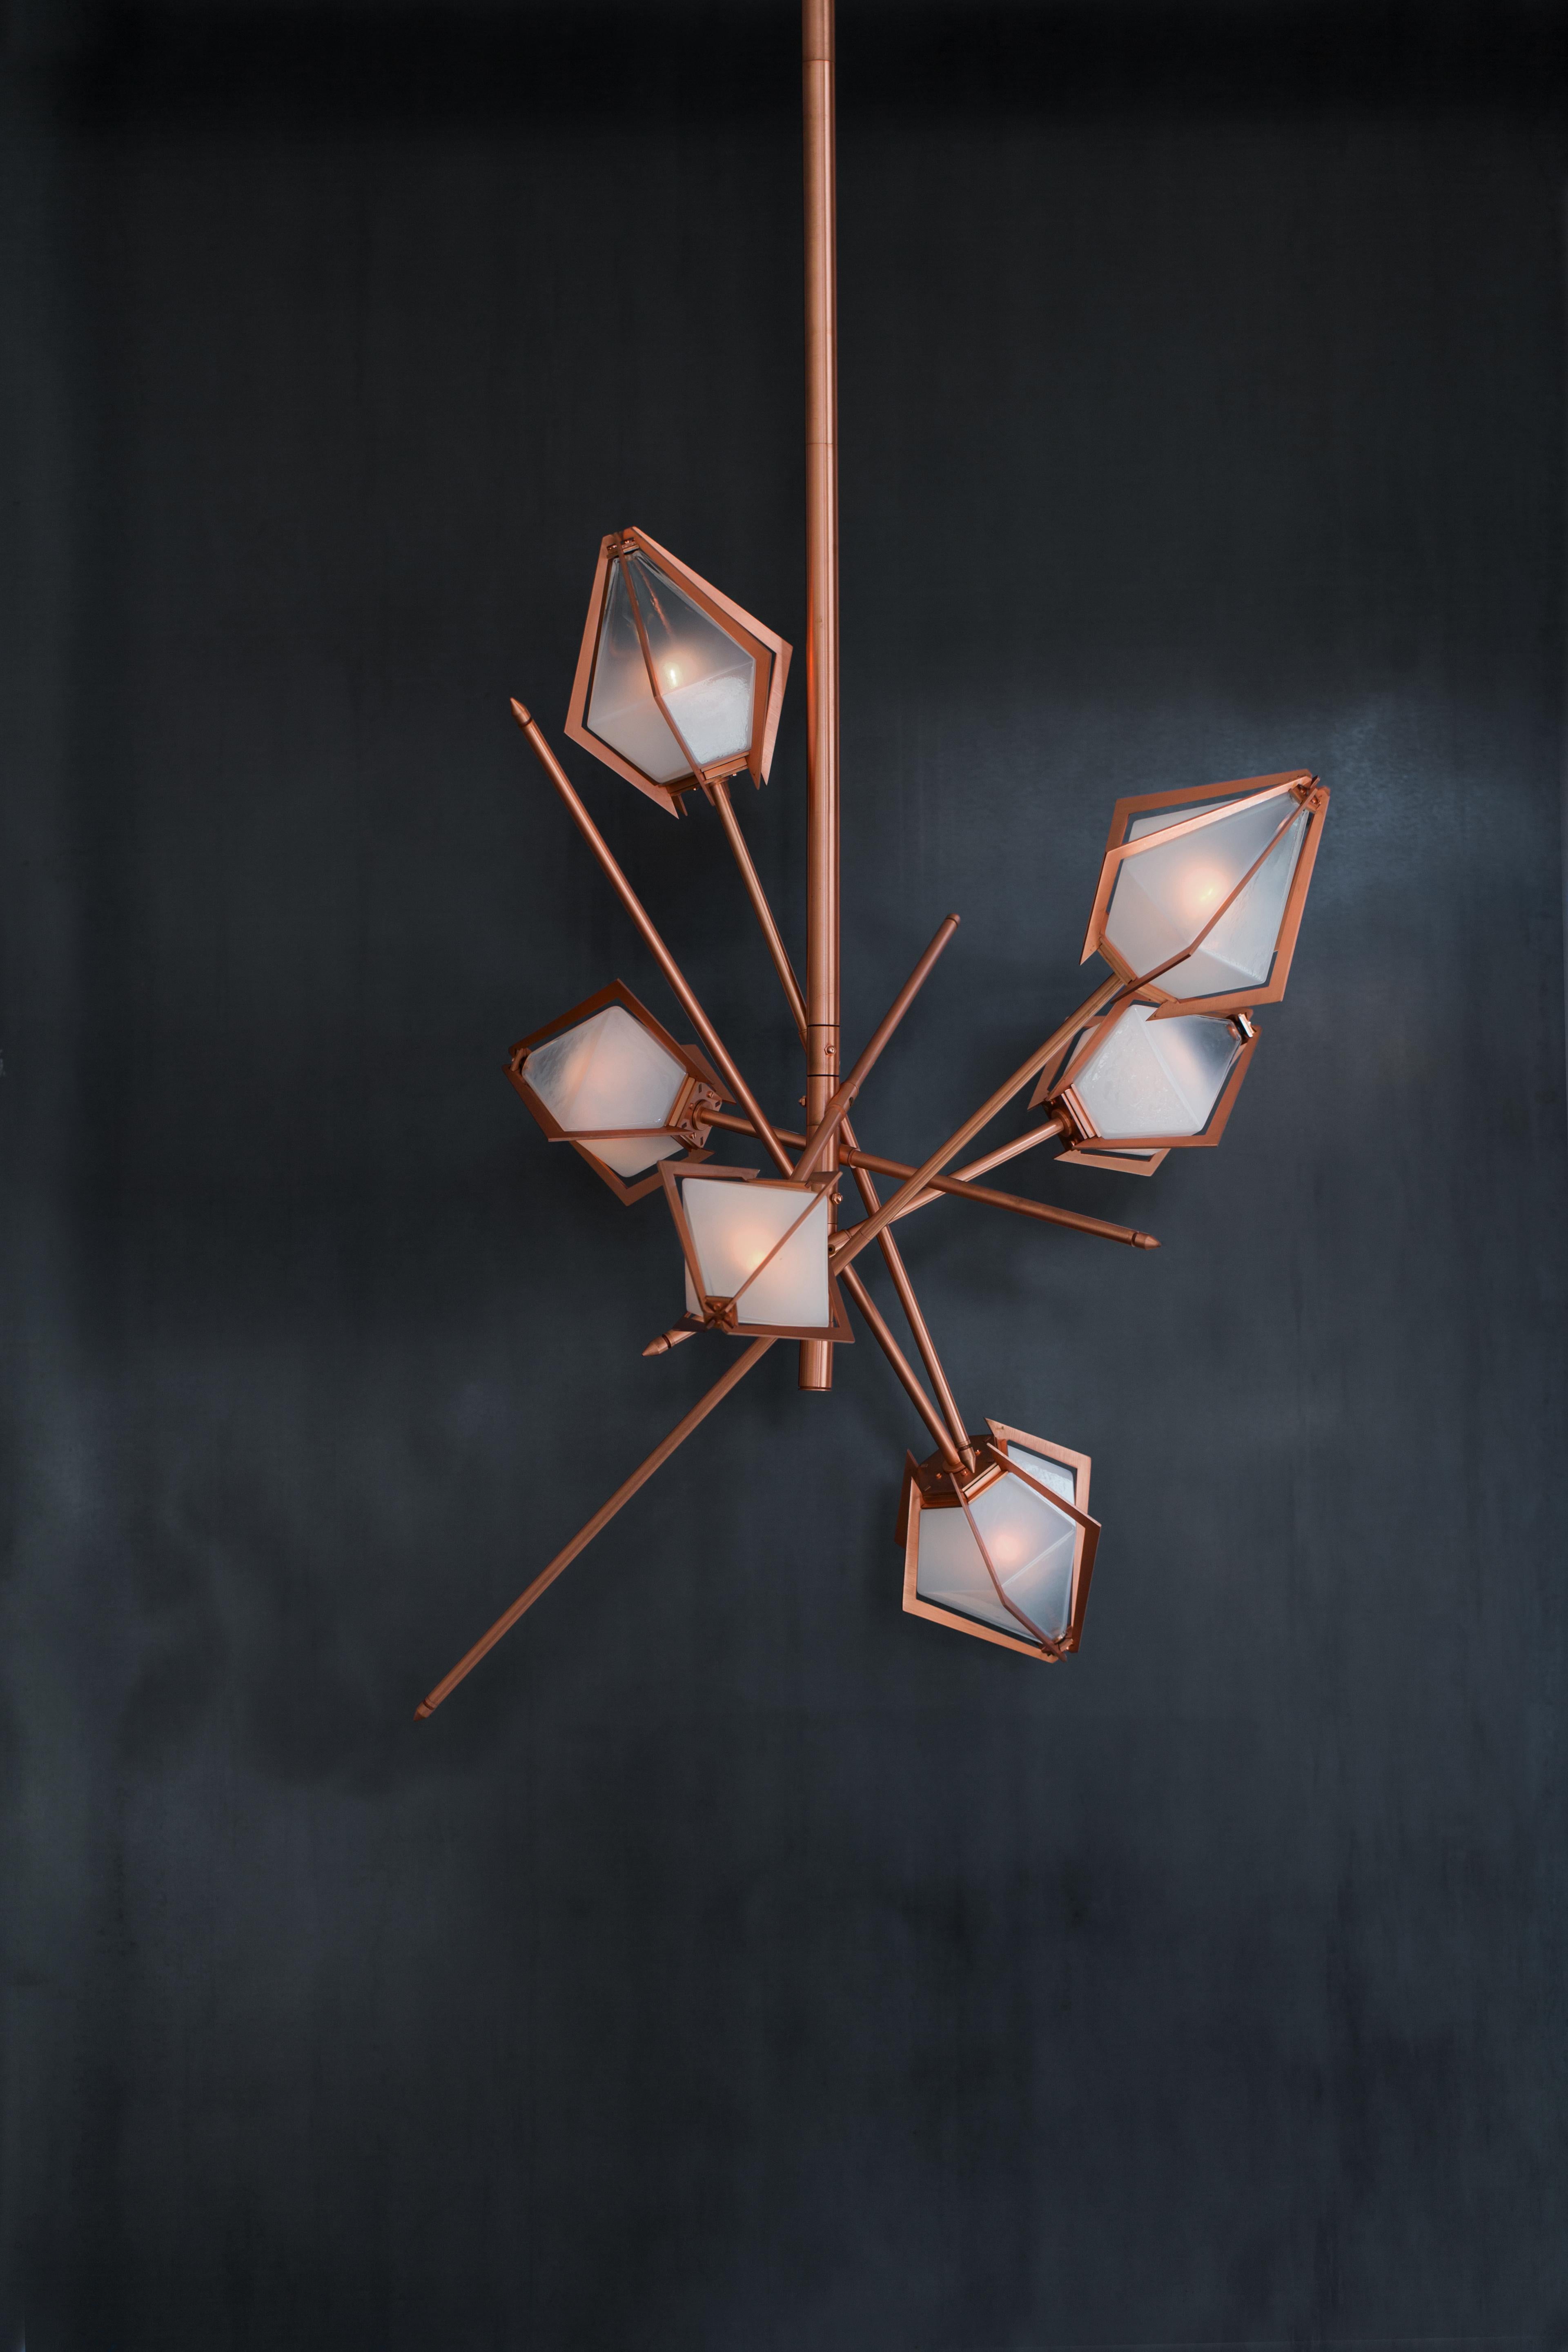 The Harlow small chandelier is an elegant sculptural light fixture inspired by jewelry design featuring a mold-blown glass gem in a chic metallic setting to create an asymmetrical starburst of light. Harlow is available in various color ways, and